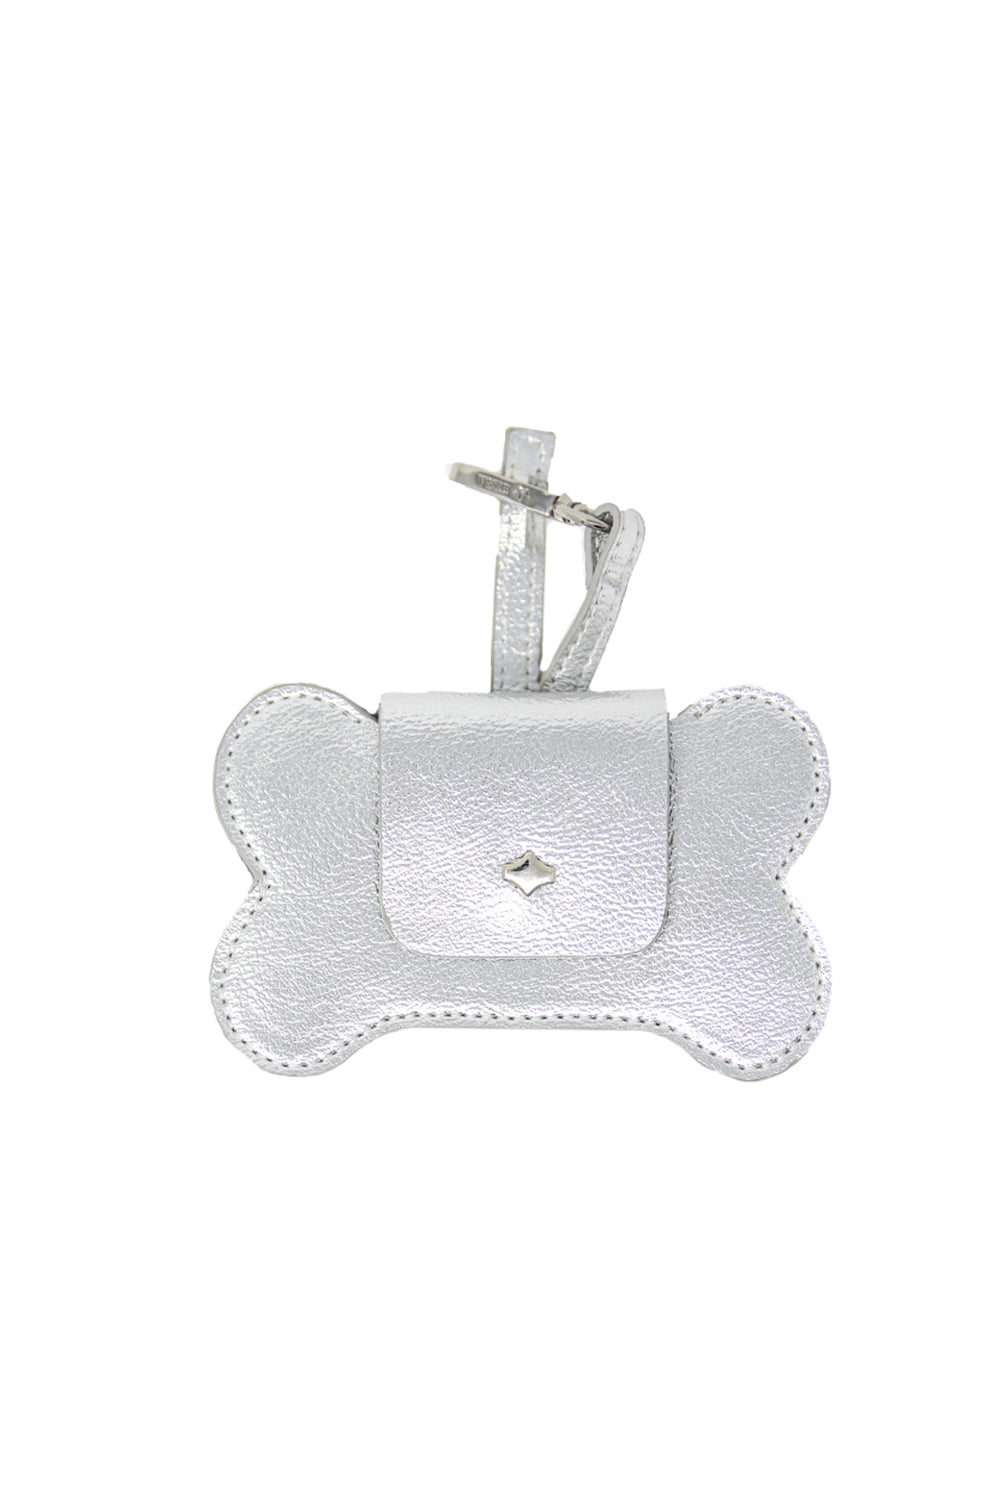 THOR UTILITY POUCH ATTACHMENT